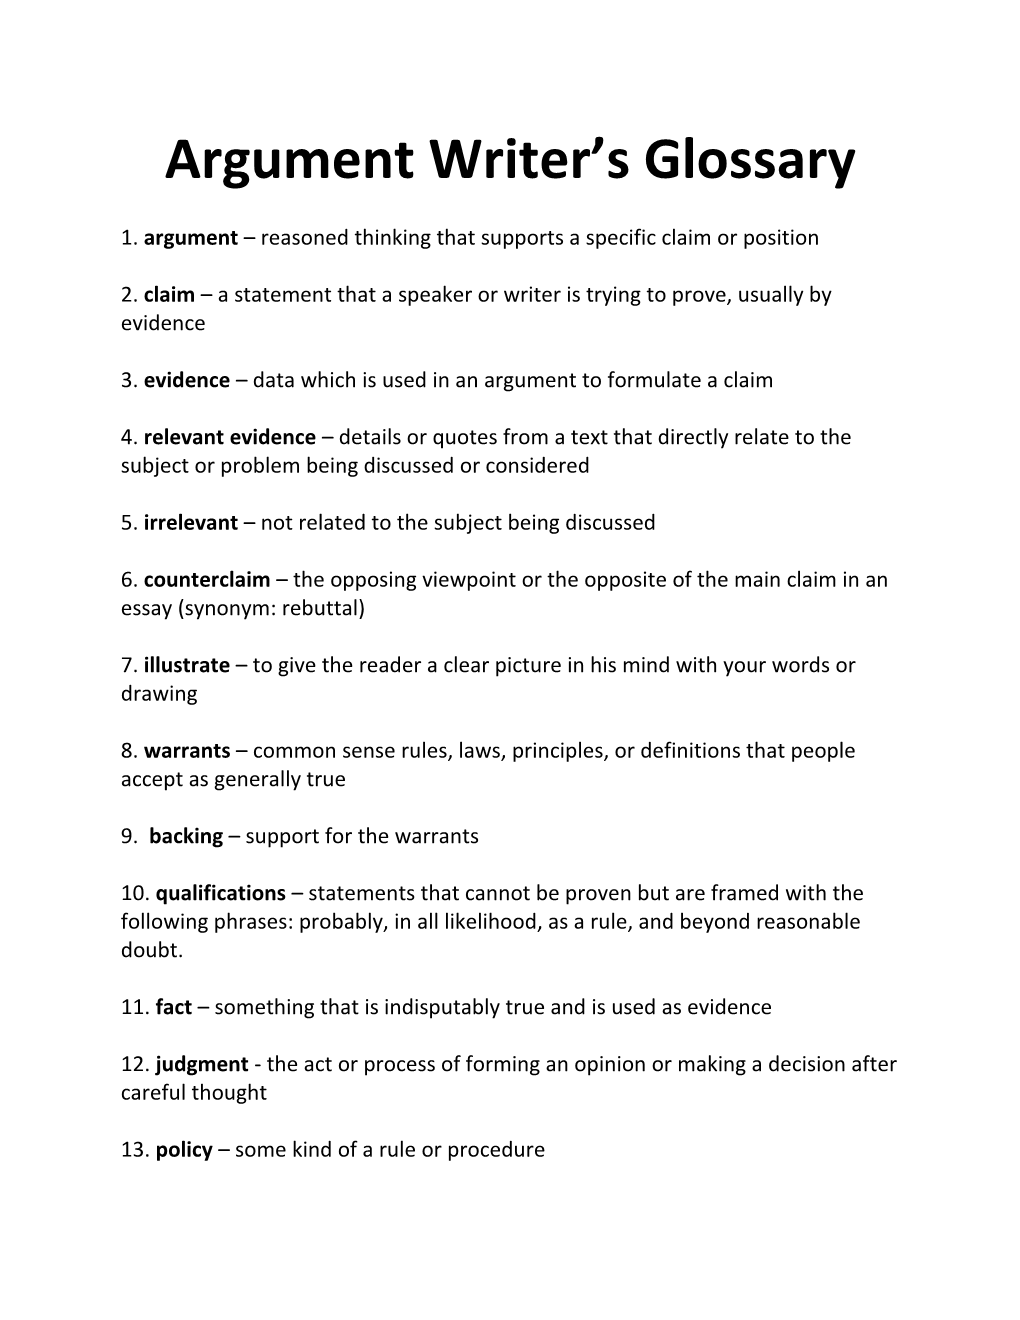 1. Argument Reasoned Thinking That Supports a Specific Claim Or Position